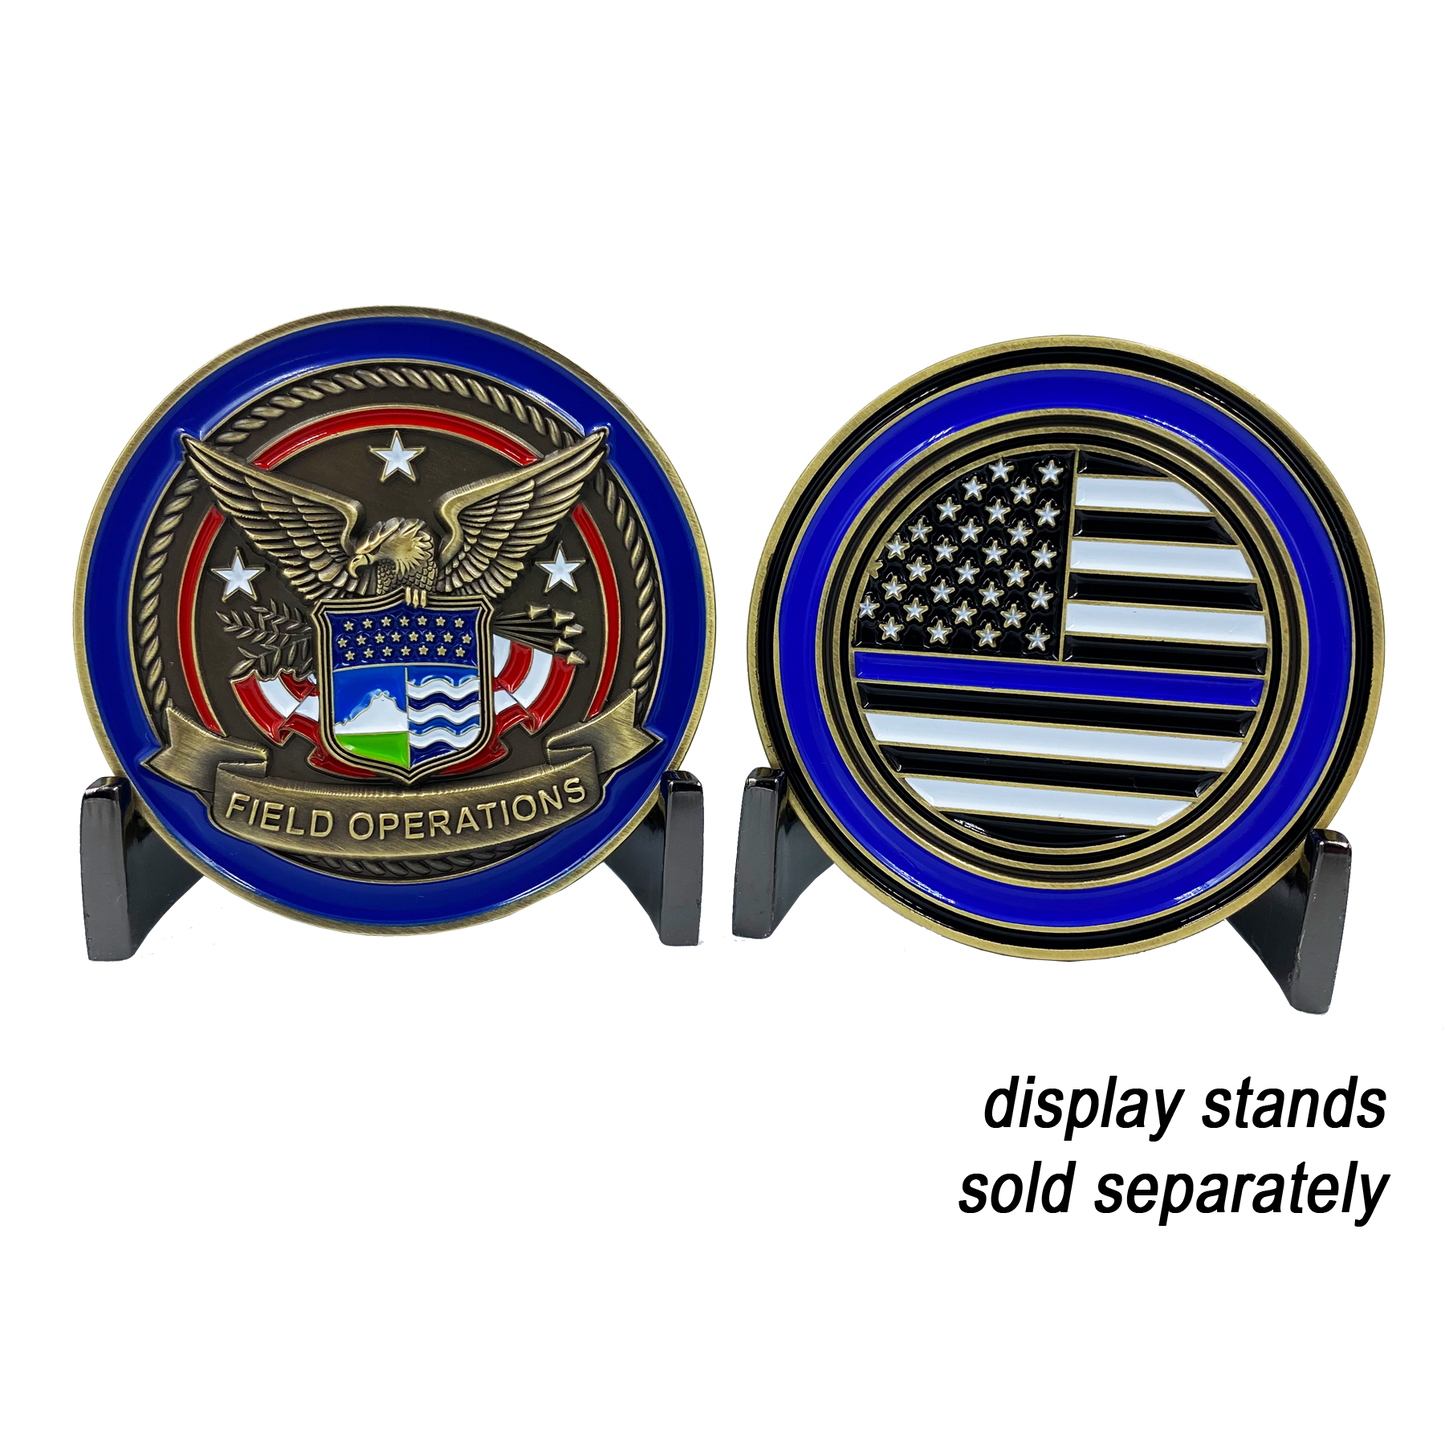 GG-001 CBP Field Operations Challenge Coin Field Ops Thin Blue Line Police Officer